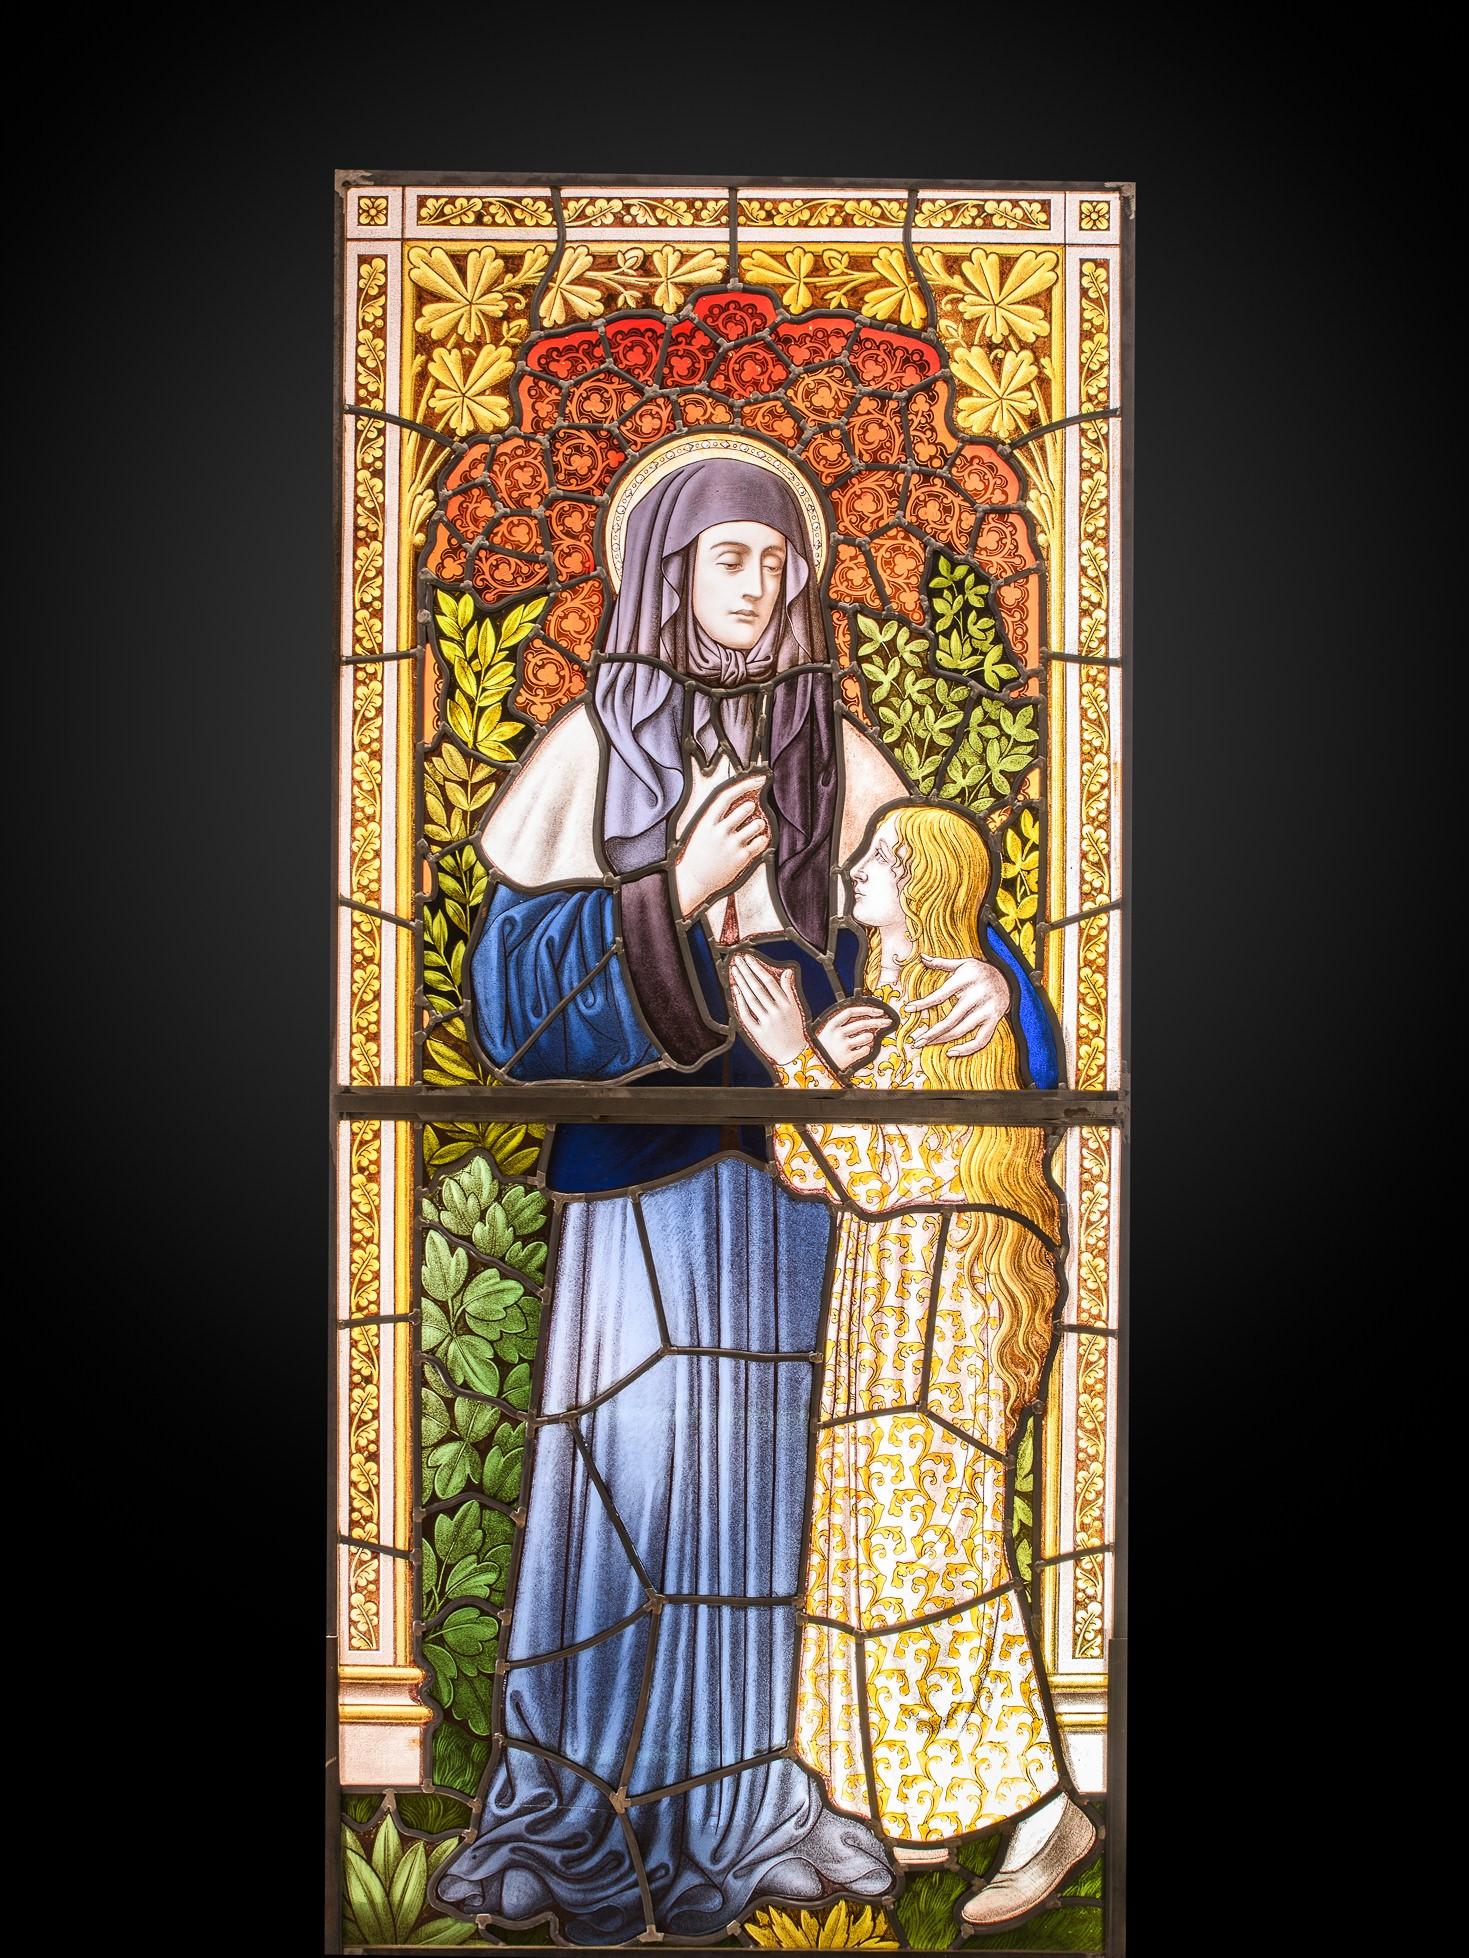 Neo-Gothic Stained Glass Window with St. Angela - Art by Unknown